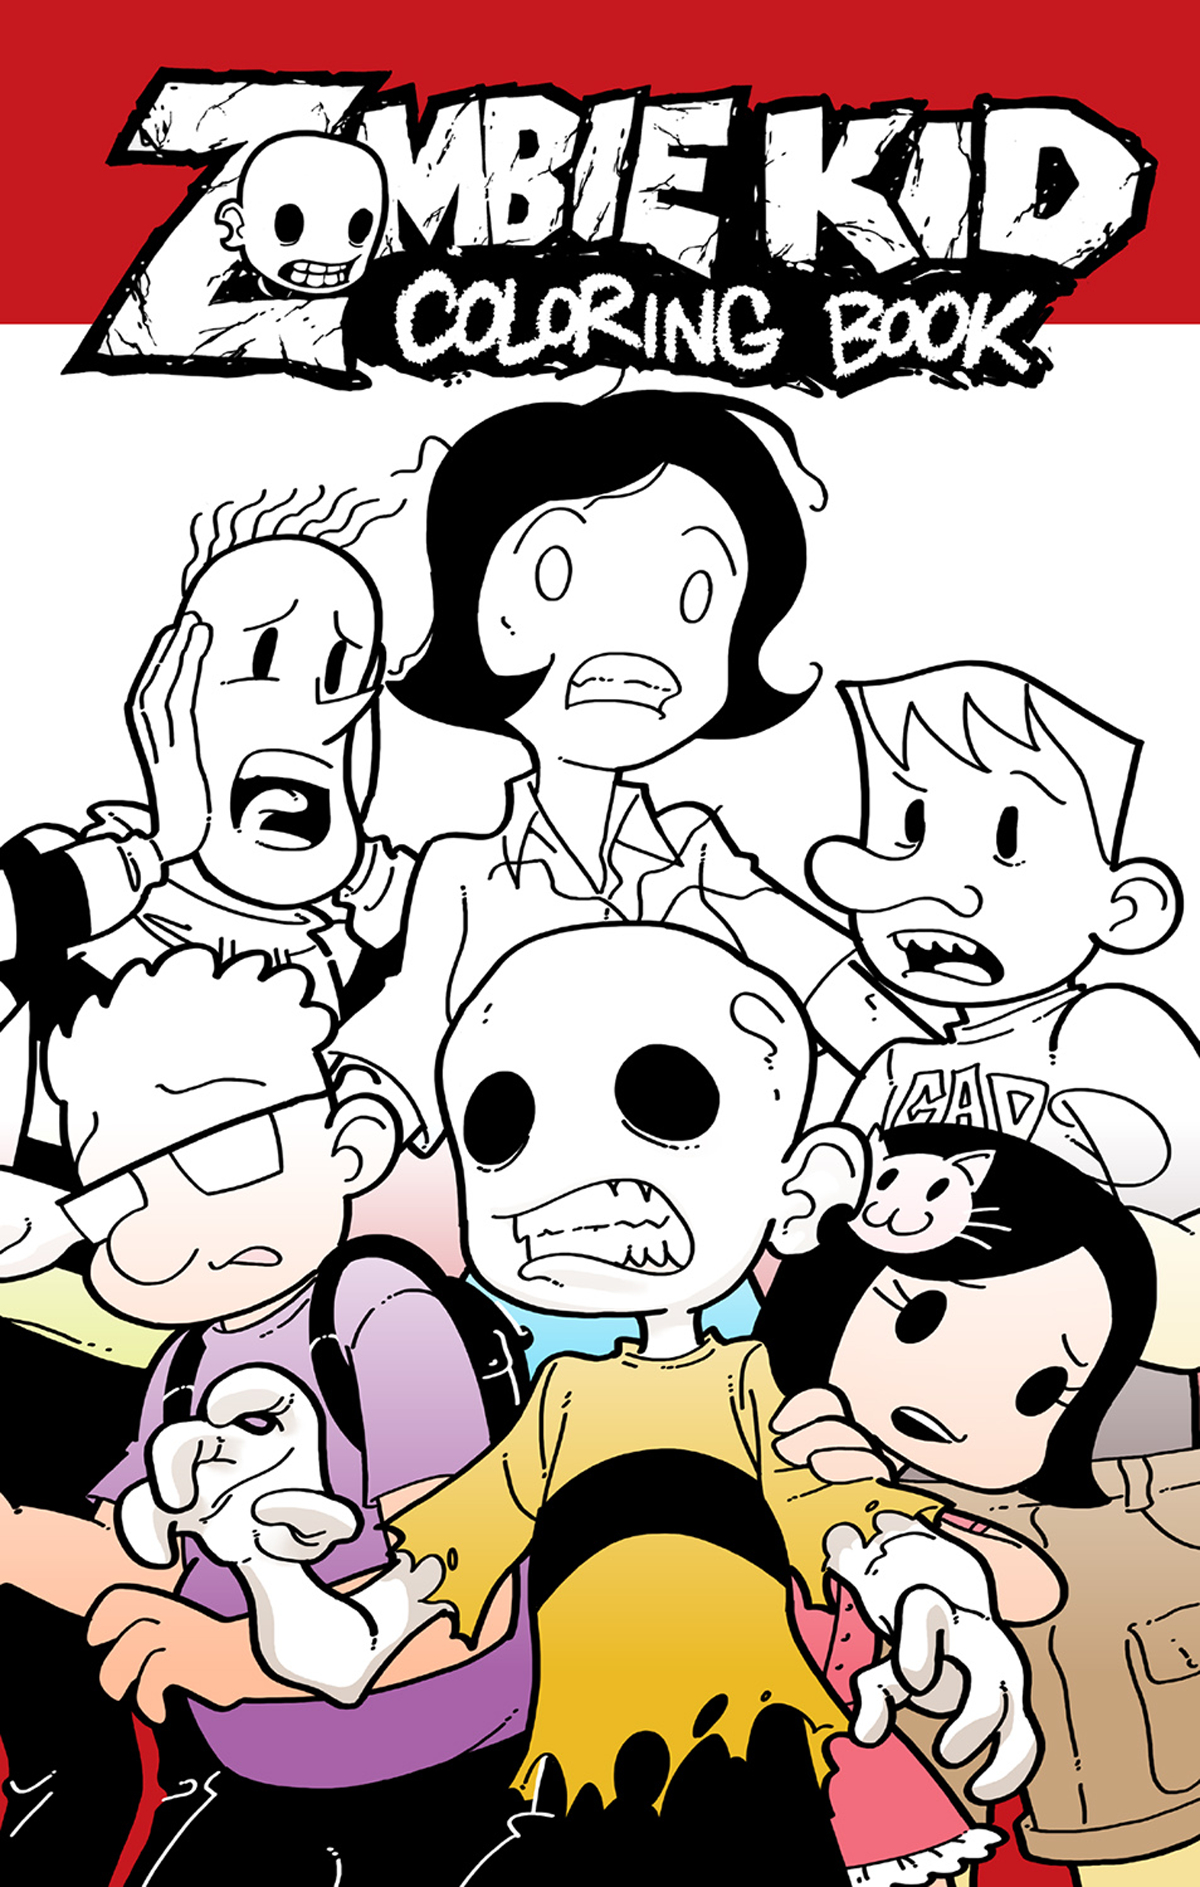 ZOMBIE KID DIARIES COLORING BOOK (ONE SHOT)